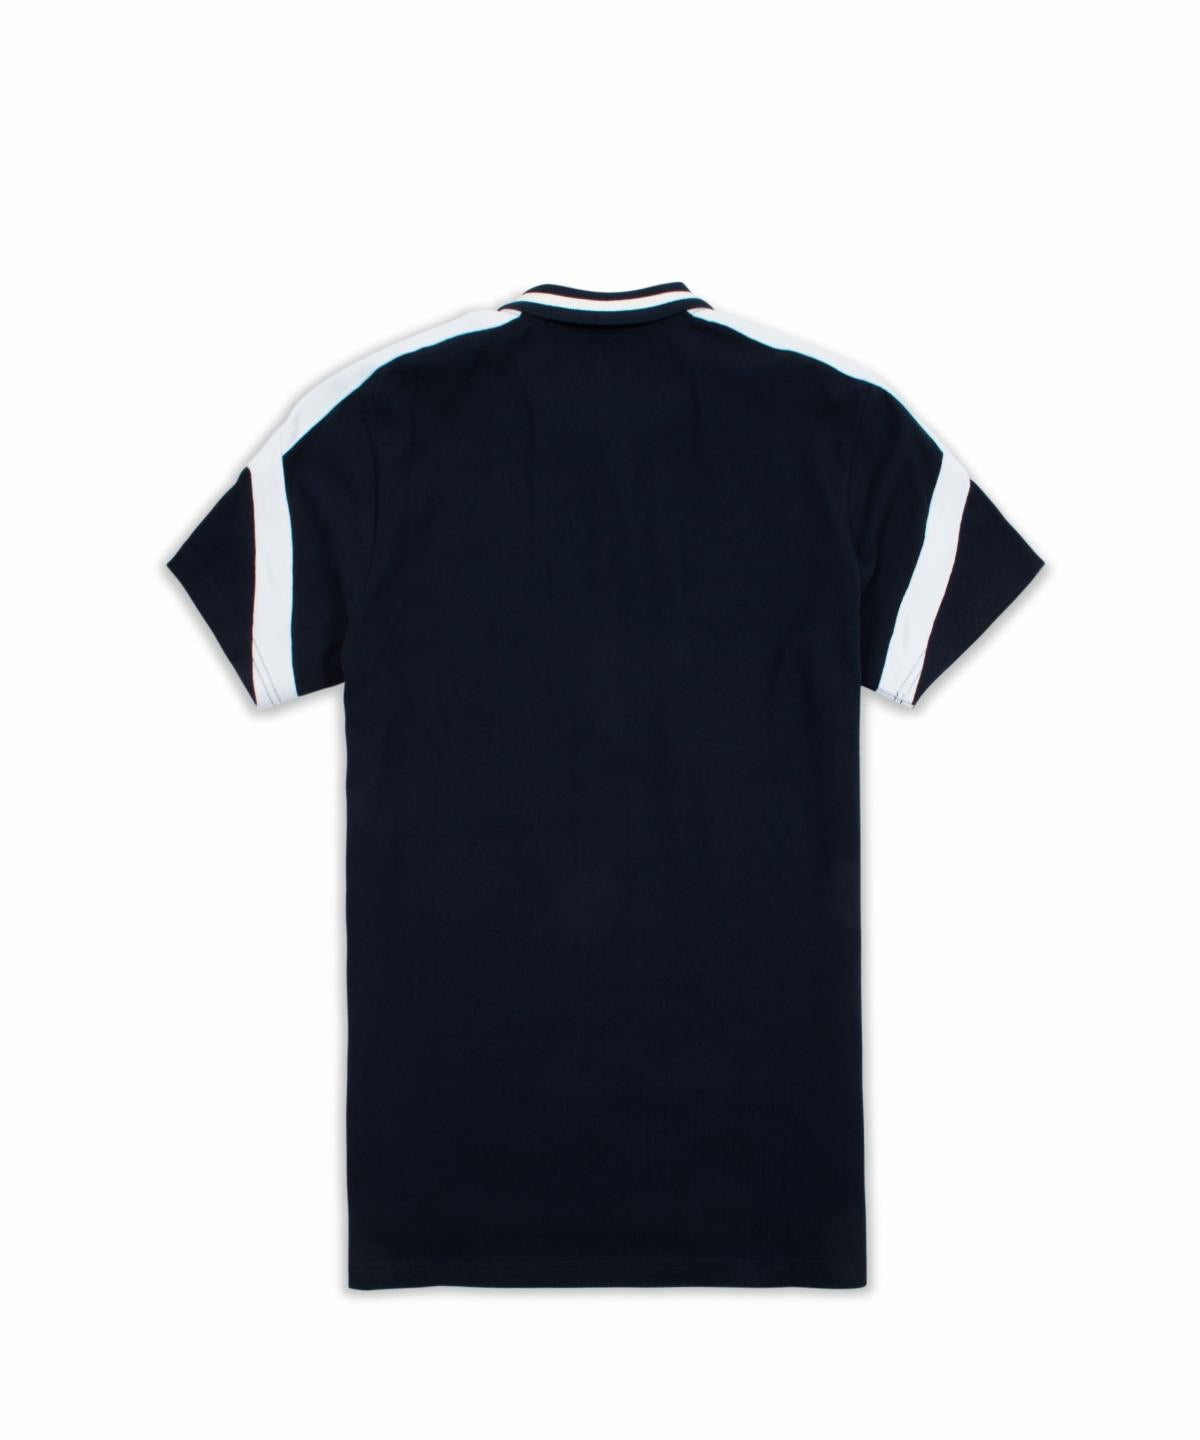 Reason Clothing-Westfield Polo Fit-Navy Blue-Q8-115-113